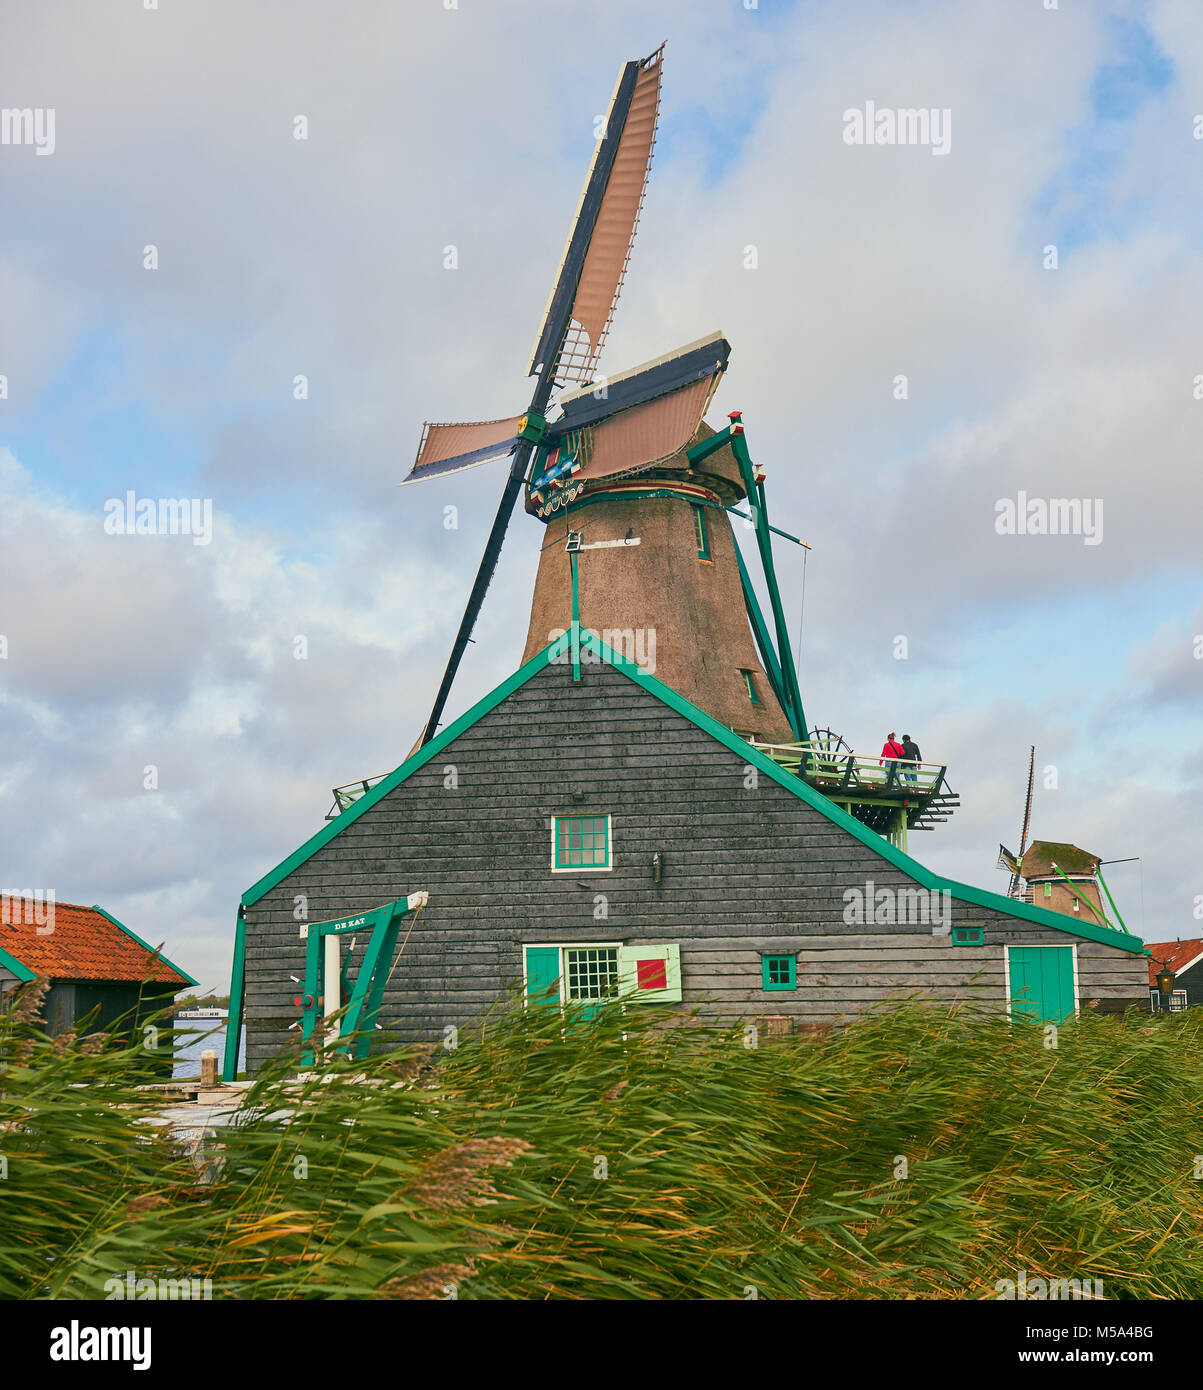 De Kat, a colour mill which harnesses the power of the wind to grind a variety of natural dyes and pigments, Zaanse Schans, North Holland, Netherlands Stock Photo